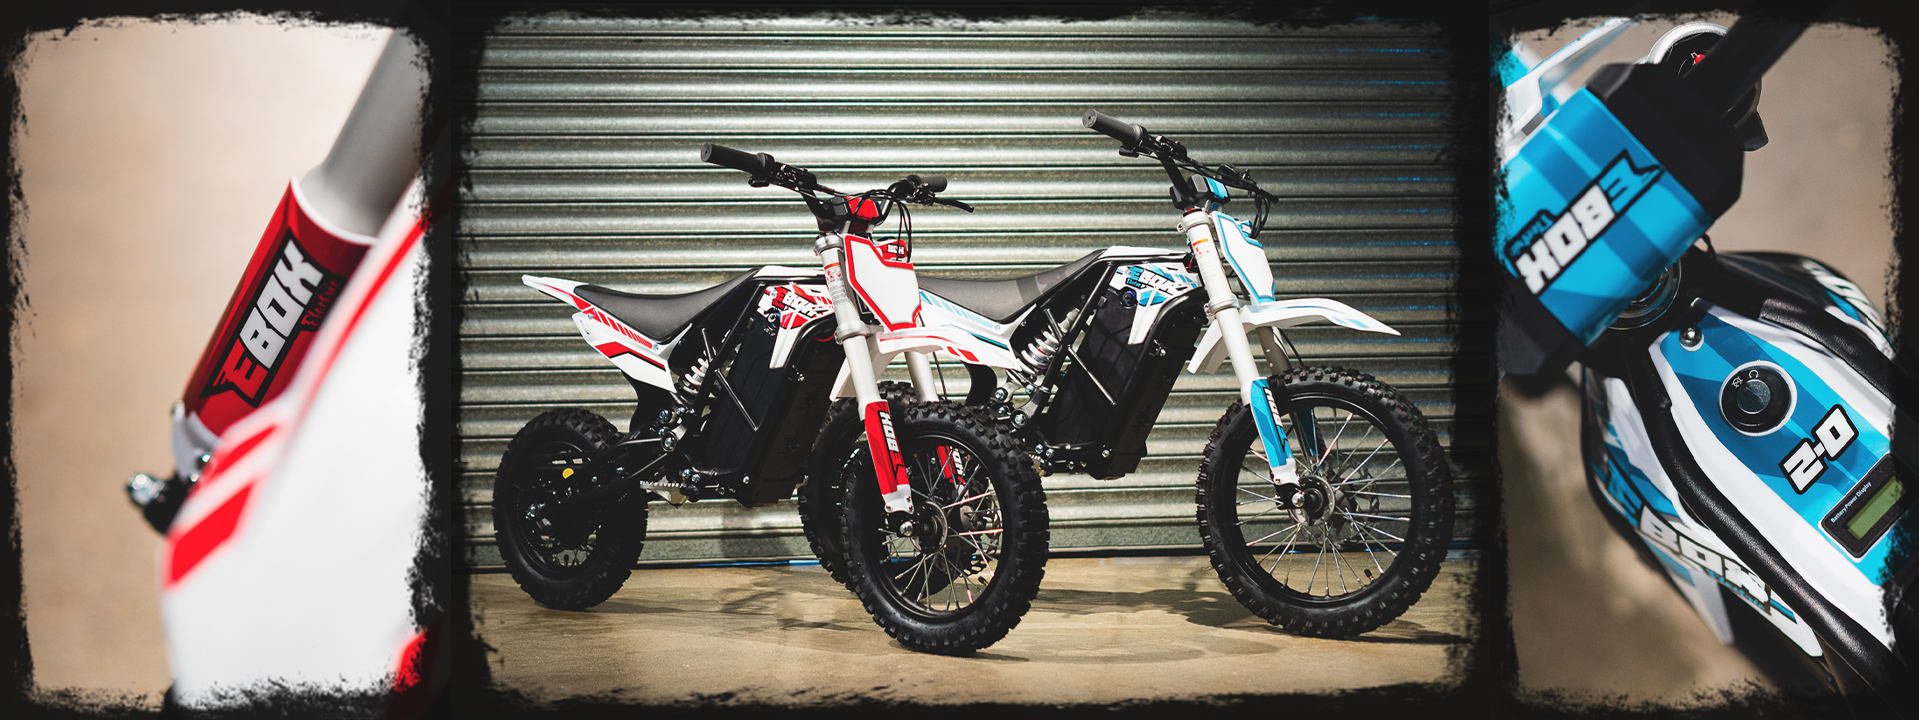 Electric pit bikes and ATVs Electric pit bikes for sale EBOX electric dirt bikes 1.6KW and 2.0KW